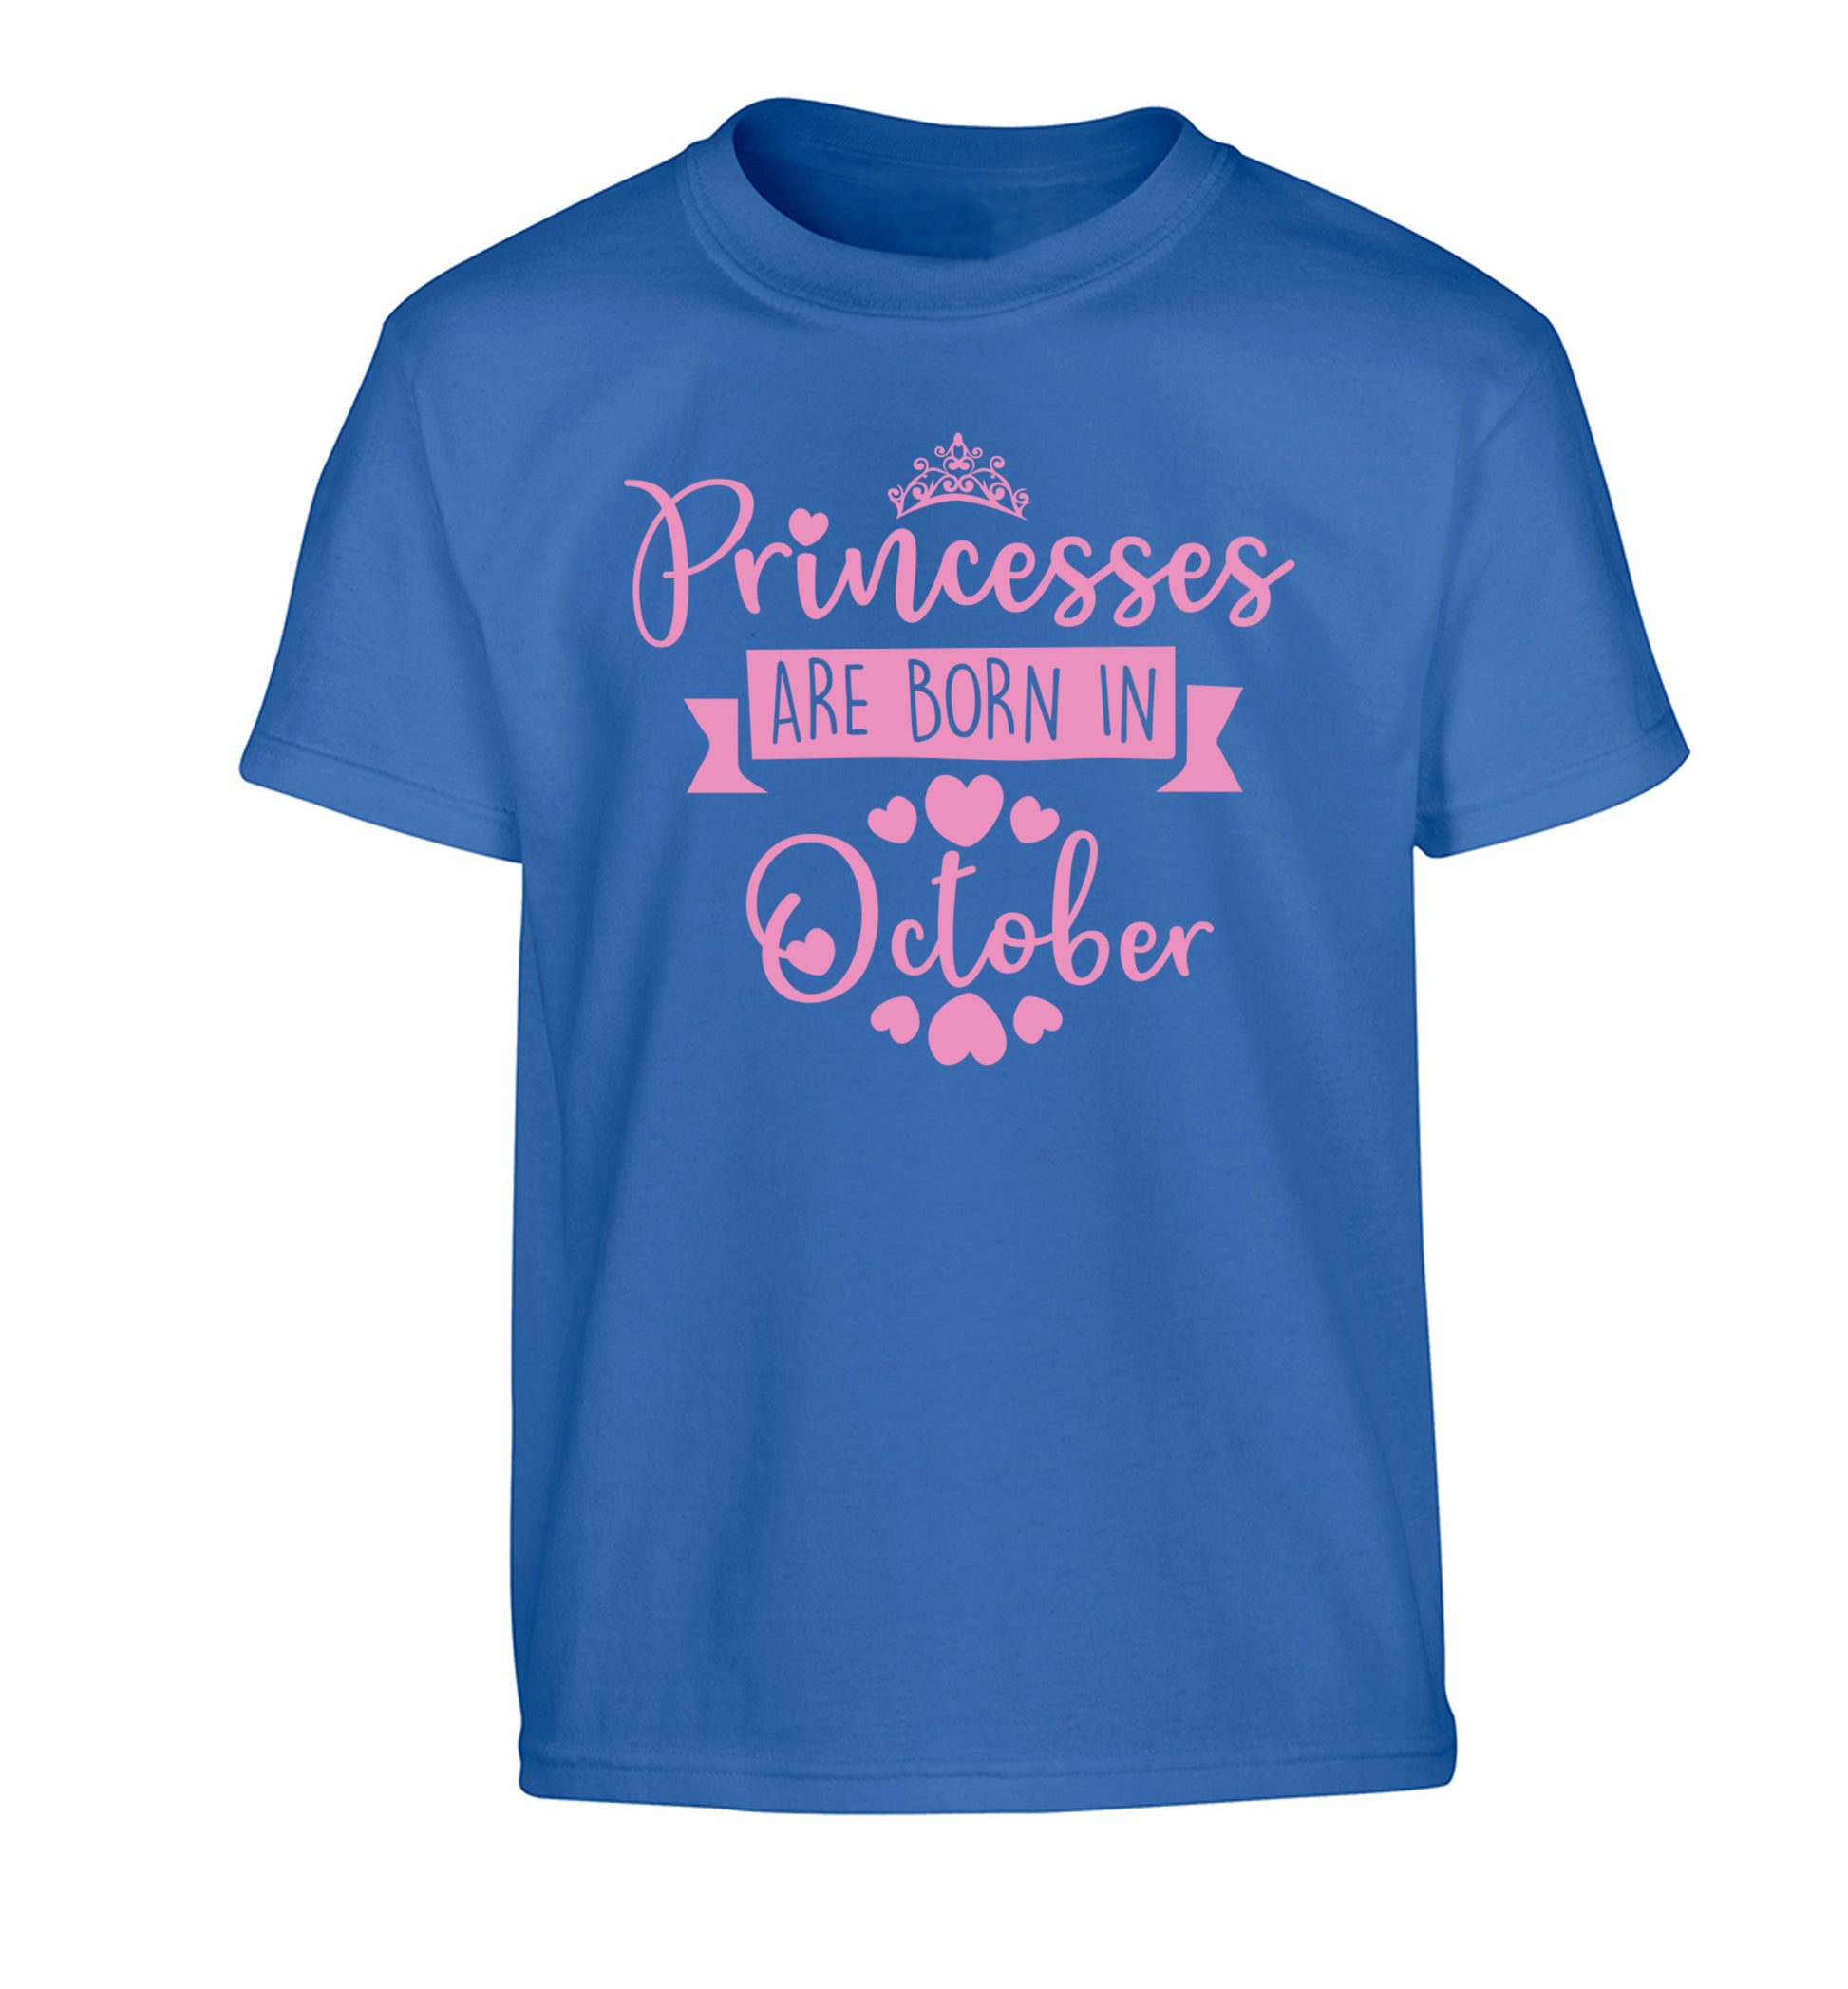 Princesses are born in October Children's blue Tshirt 12-13 Years